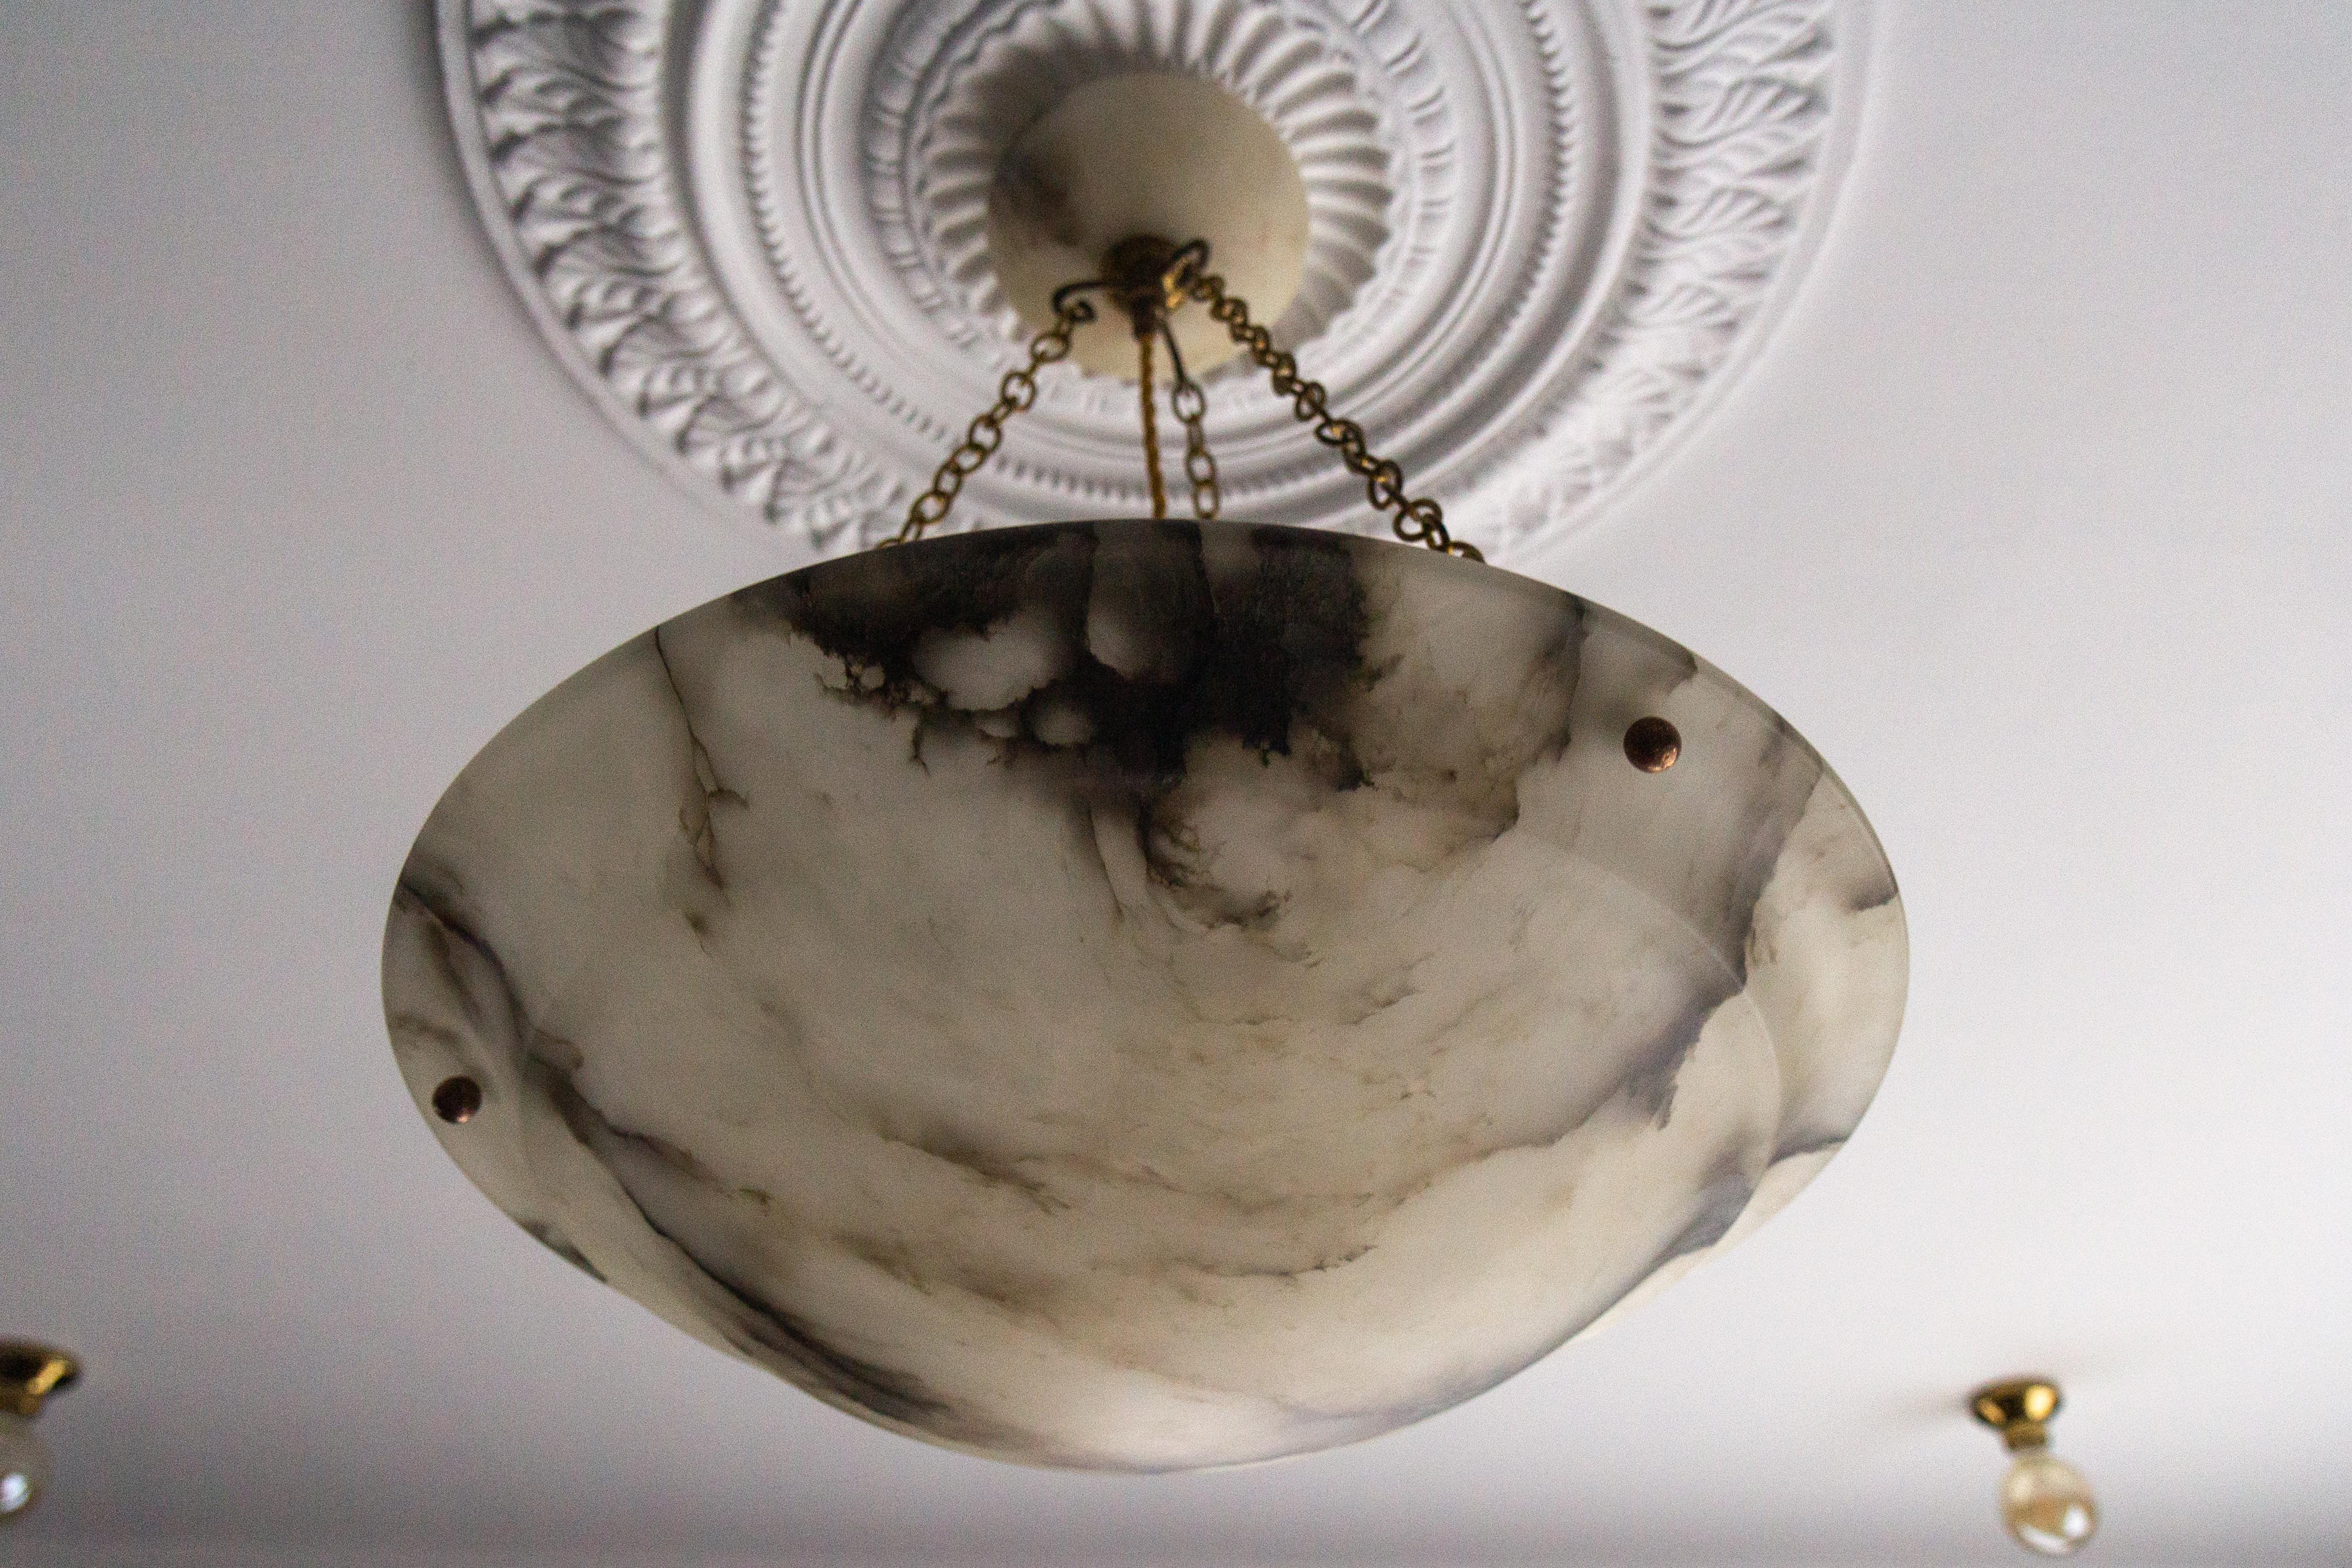 Antique large French Art Nouveau black veined white alabaster pendant light fixture.
Gorgeous and beautifully shaped alabaster pendant ceiling light fixture from circa 1920. Superbly veined and masterfully carved white alabaster bowl suspended by